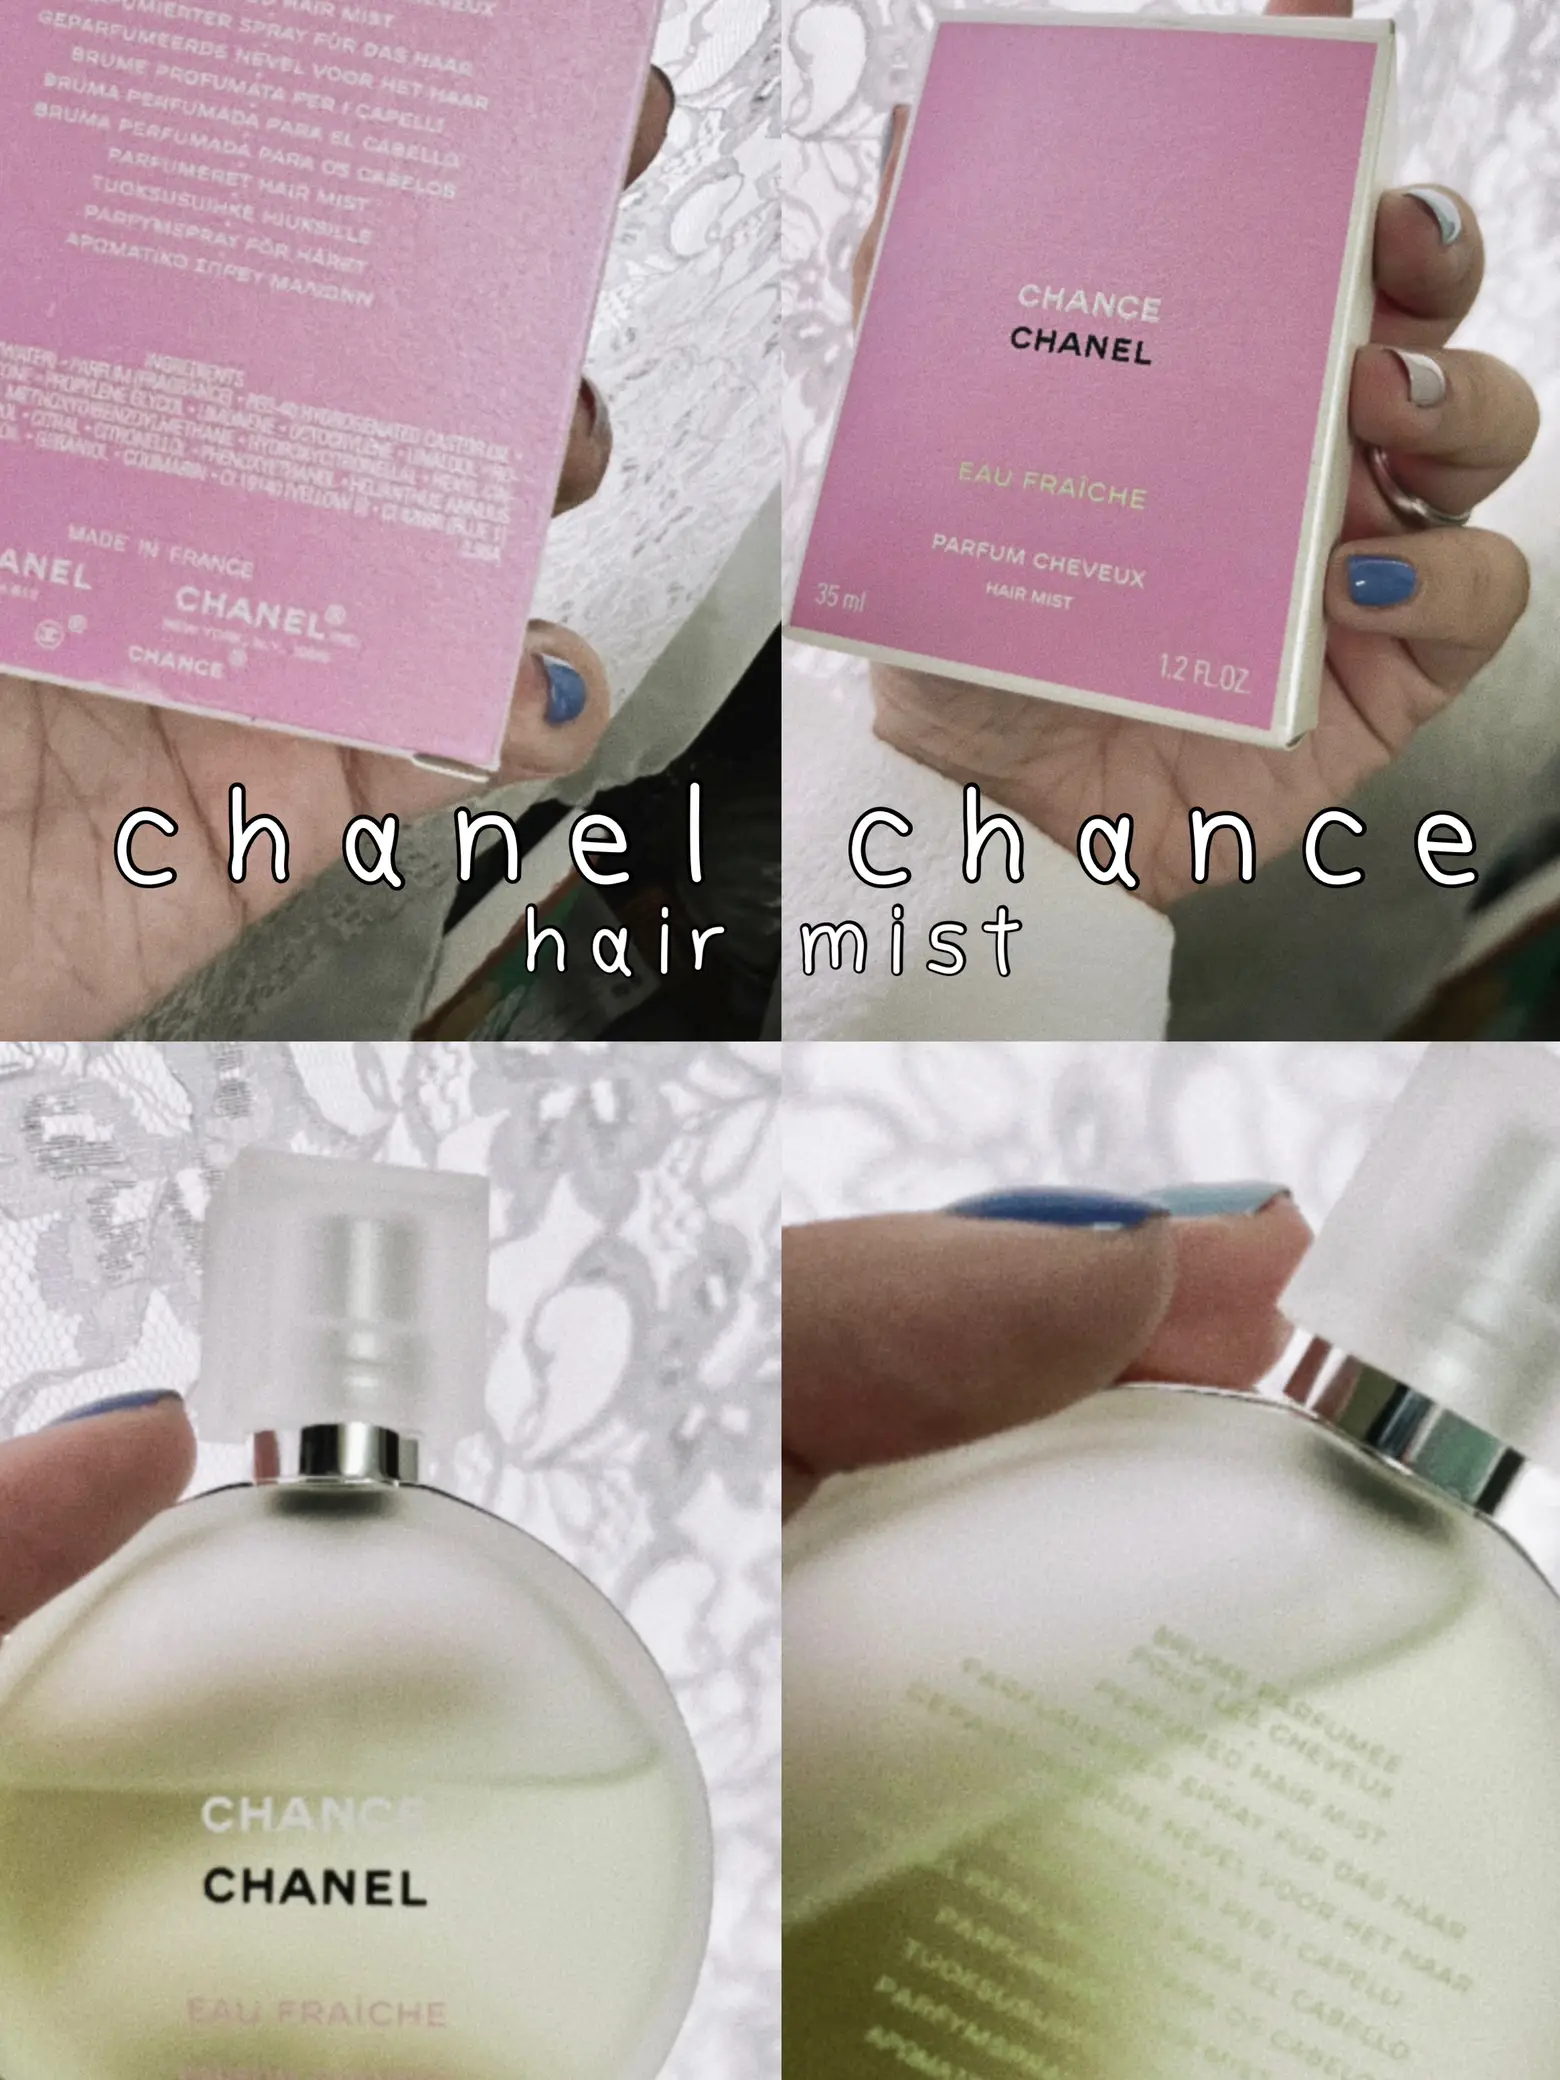 CHANEL- CHANCE EAU FRAÎCHE Hair Mist, Gallery posted by barinw